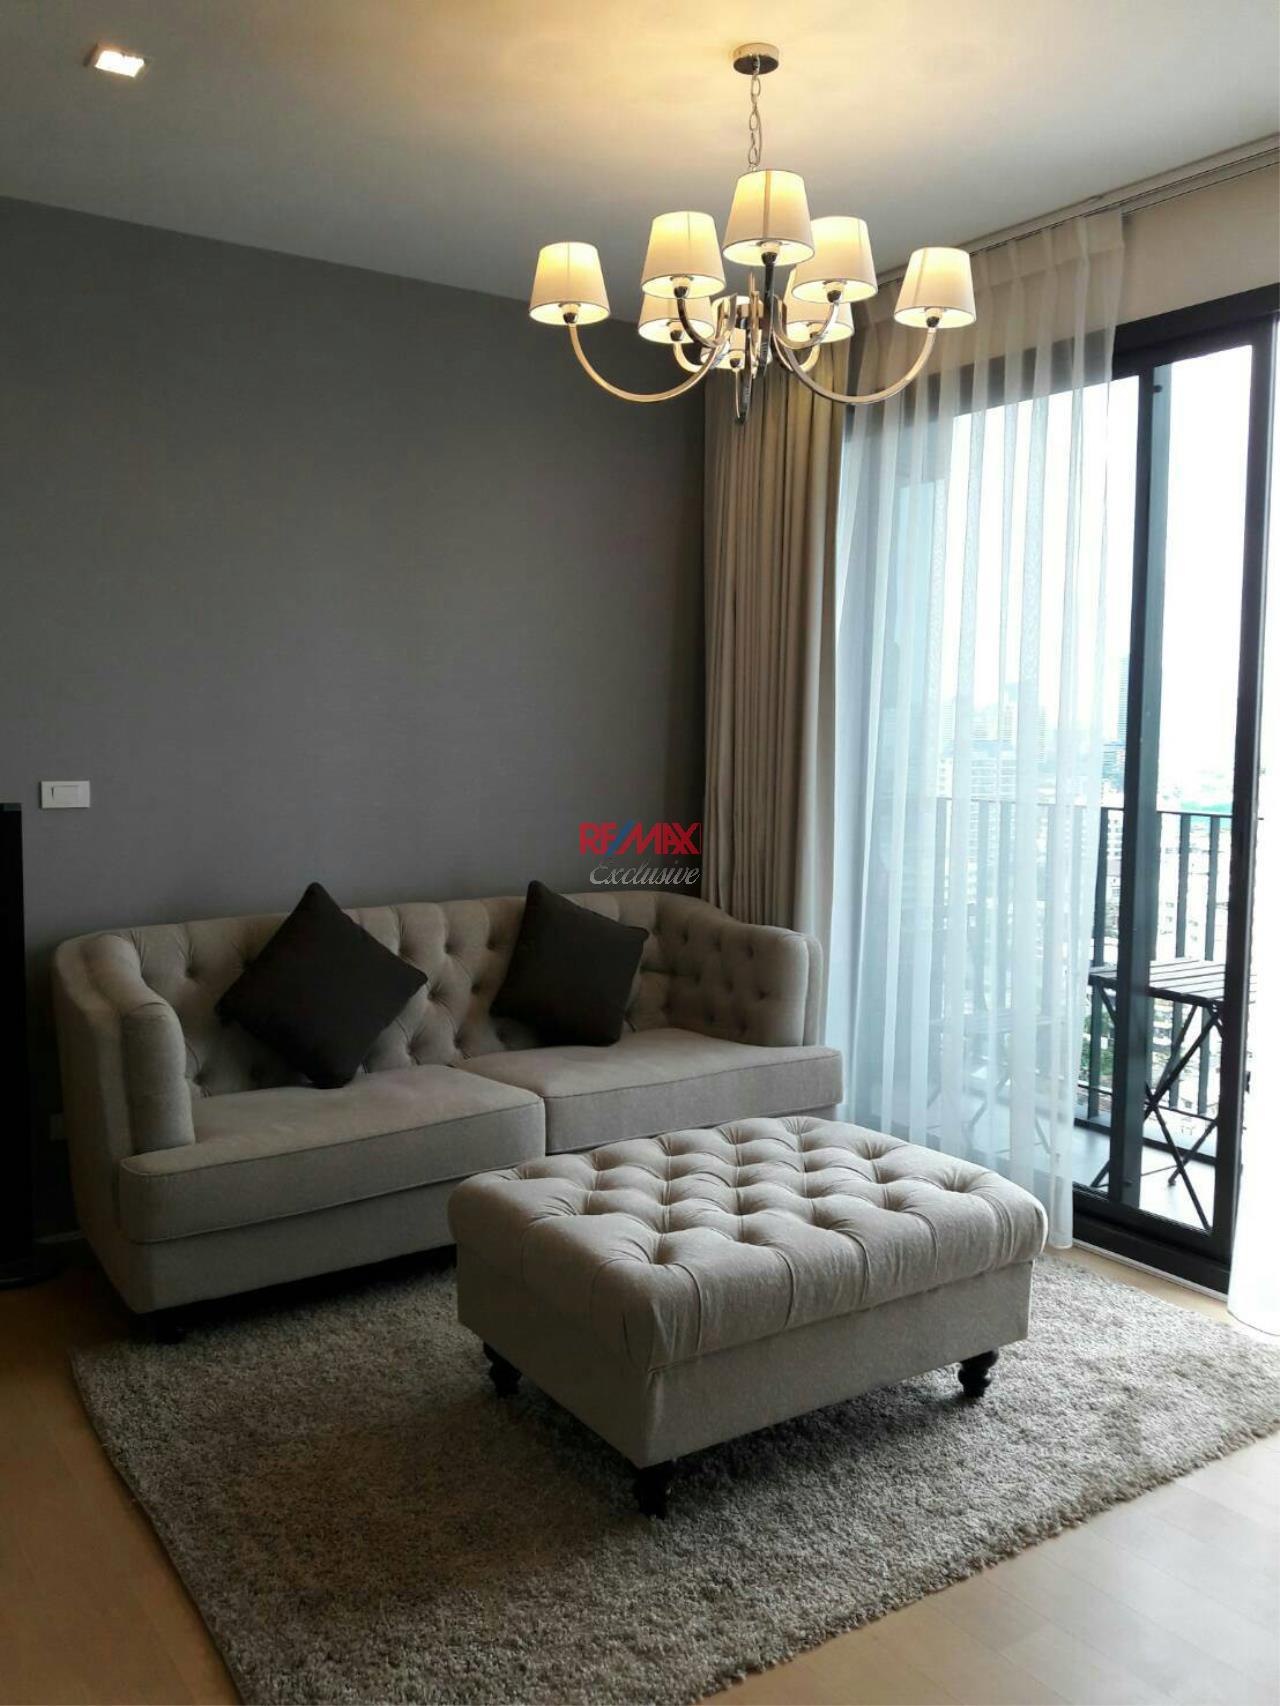 RE/MAX Exclusive Agency's HQ Thonglor 2 Bedrooms, 2 Bathrooms For Rent 75,000 THB!! 1